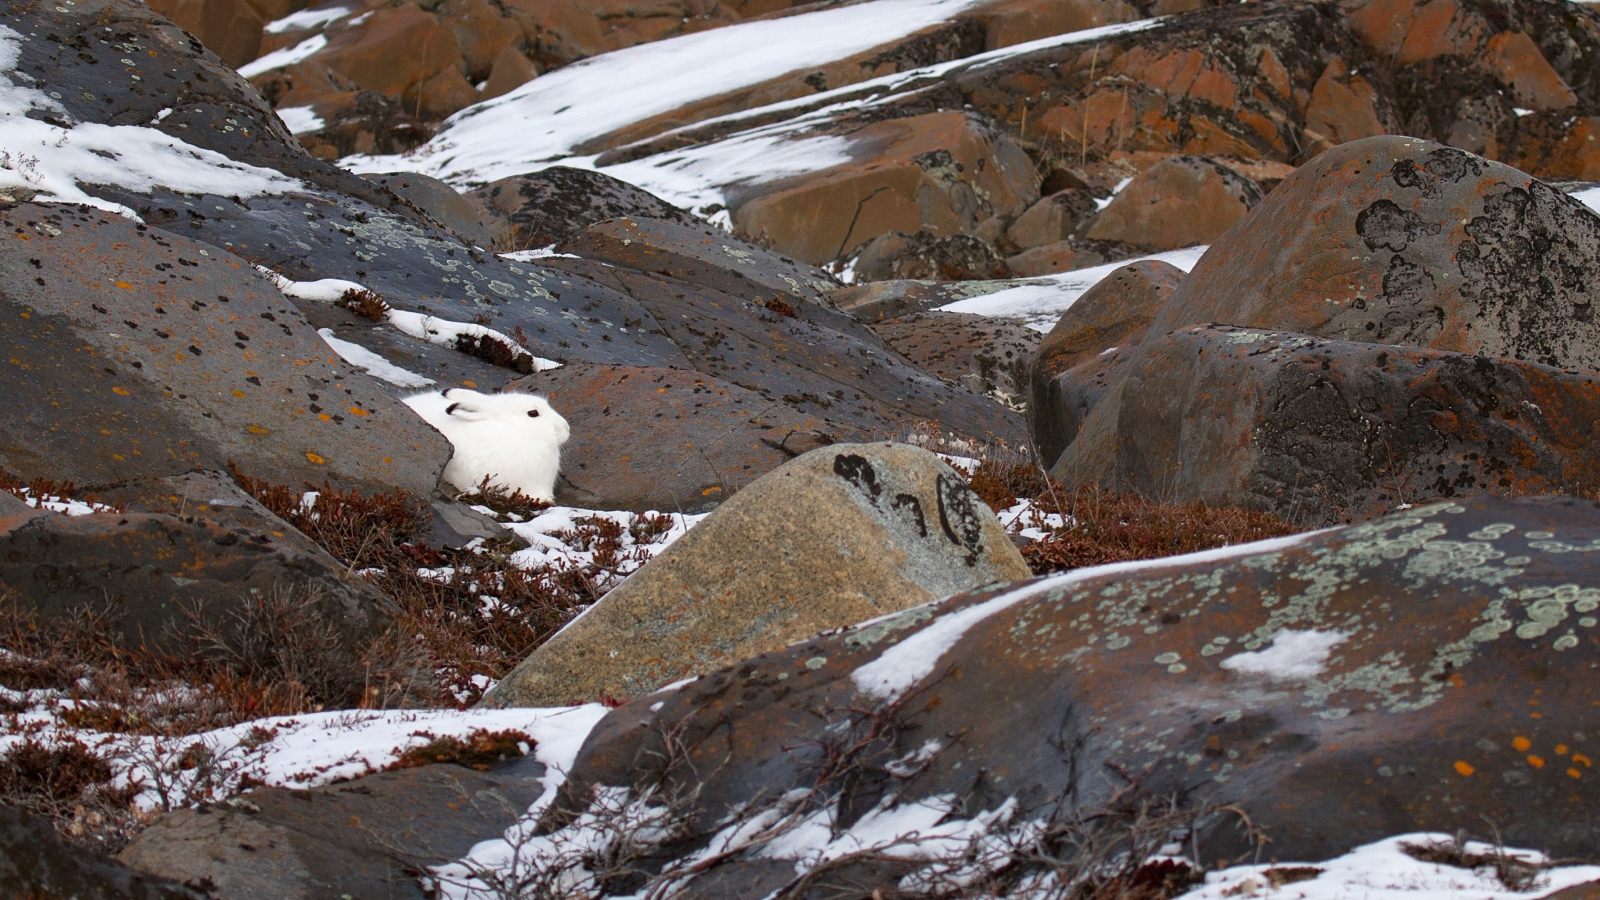 An arctic hare lay camouflaged among the snow and boulders of the Hudson Bay.